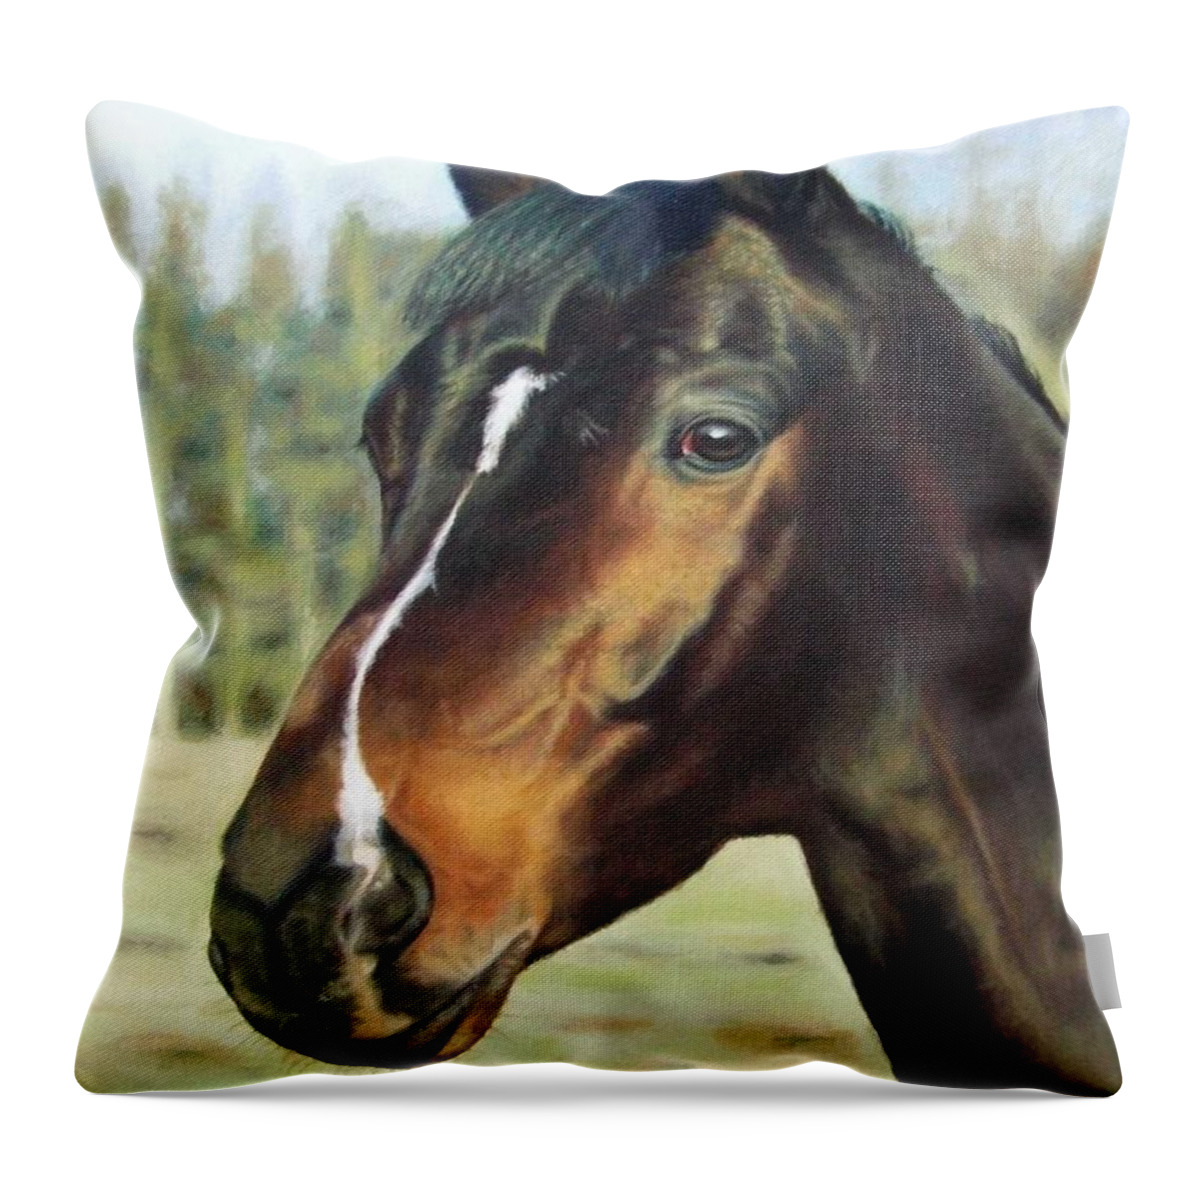 Horse Throw Pillow featuring the painting Russian Horse by Nicole Zeug